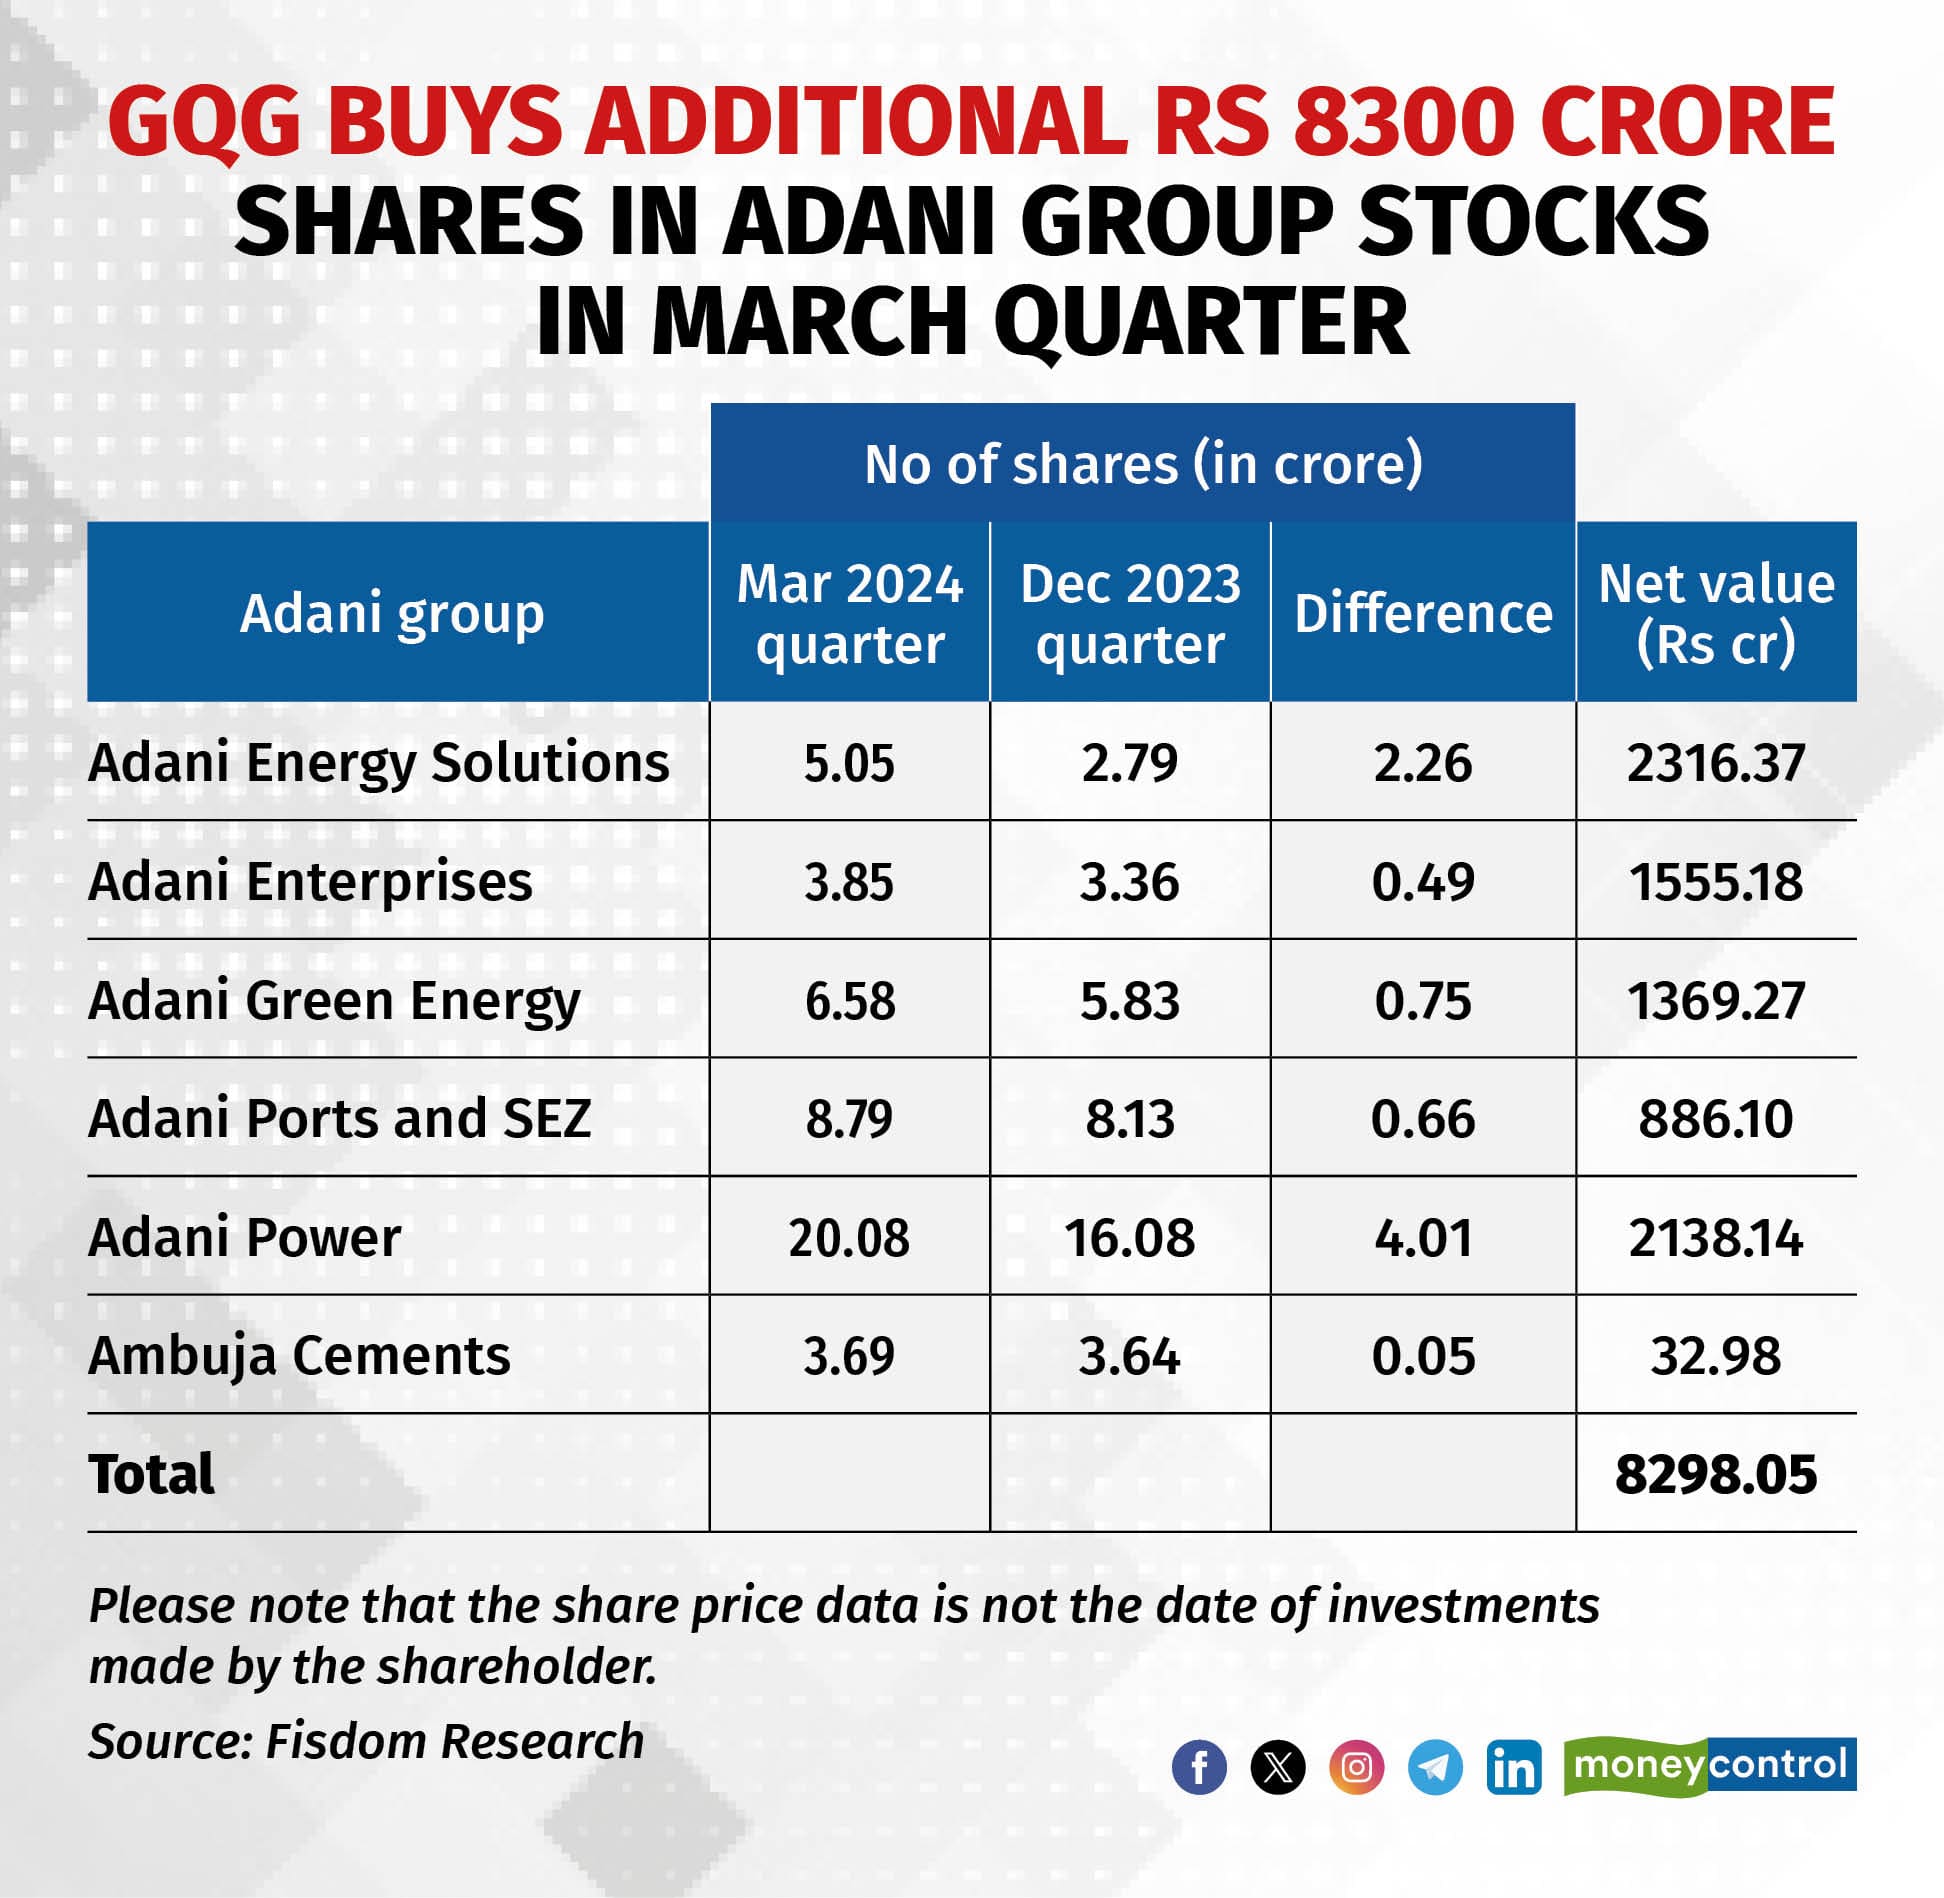 GQG buys additional Rs 8300 crore